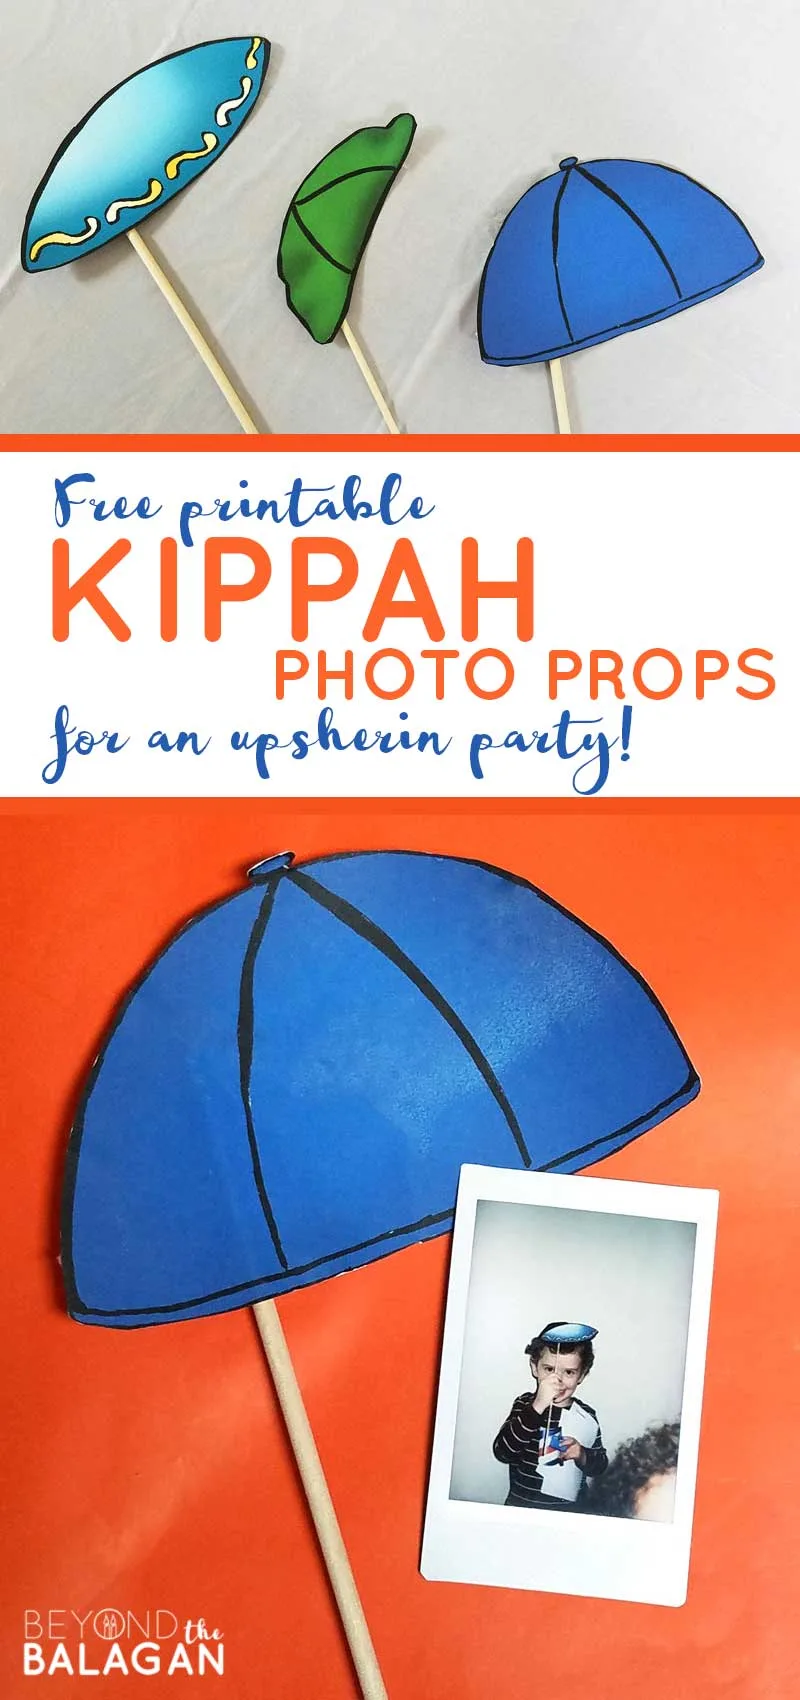 You'll love these amazing upsherin ideas! These free printable kippah photo props are really sweet for that third birthday party or even for your hanukkah party. #upsherin #kippah #beyondthebalagan